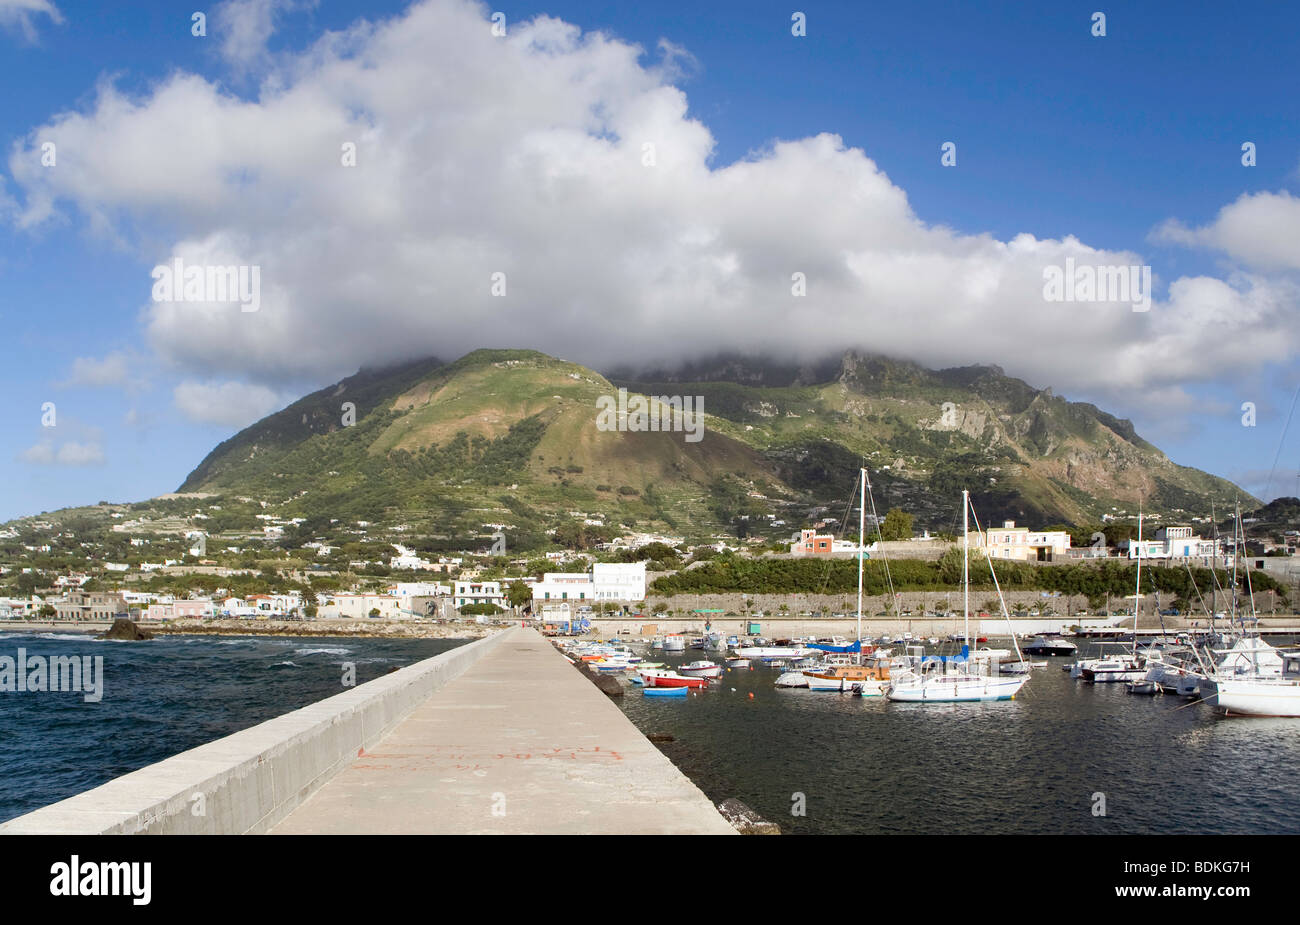 Mt Epomeo shrouded in white clouds from Forio harbour wall, Ischia, Italy Stock Photo